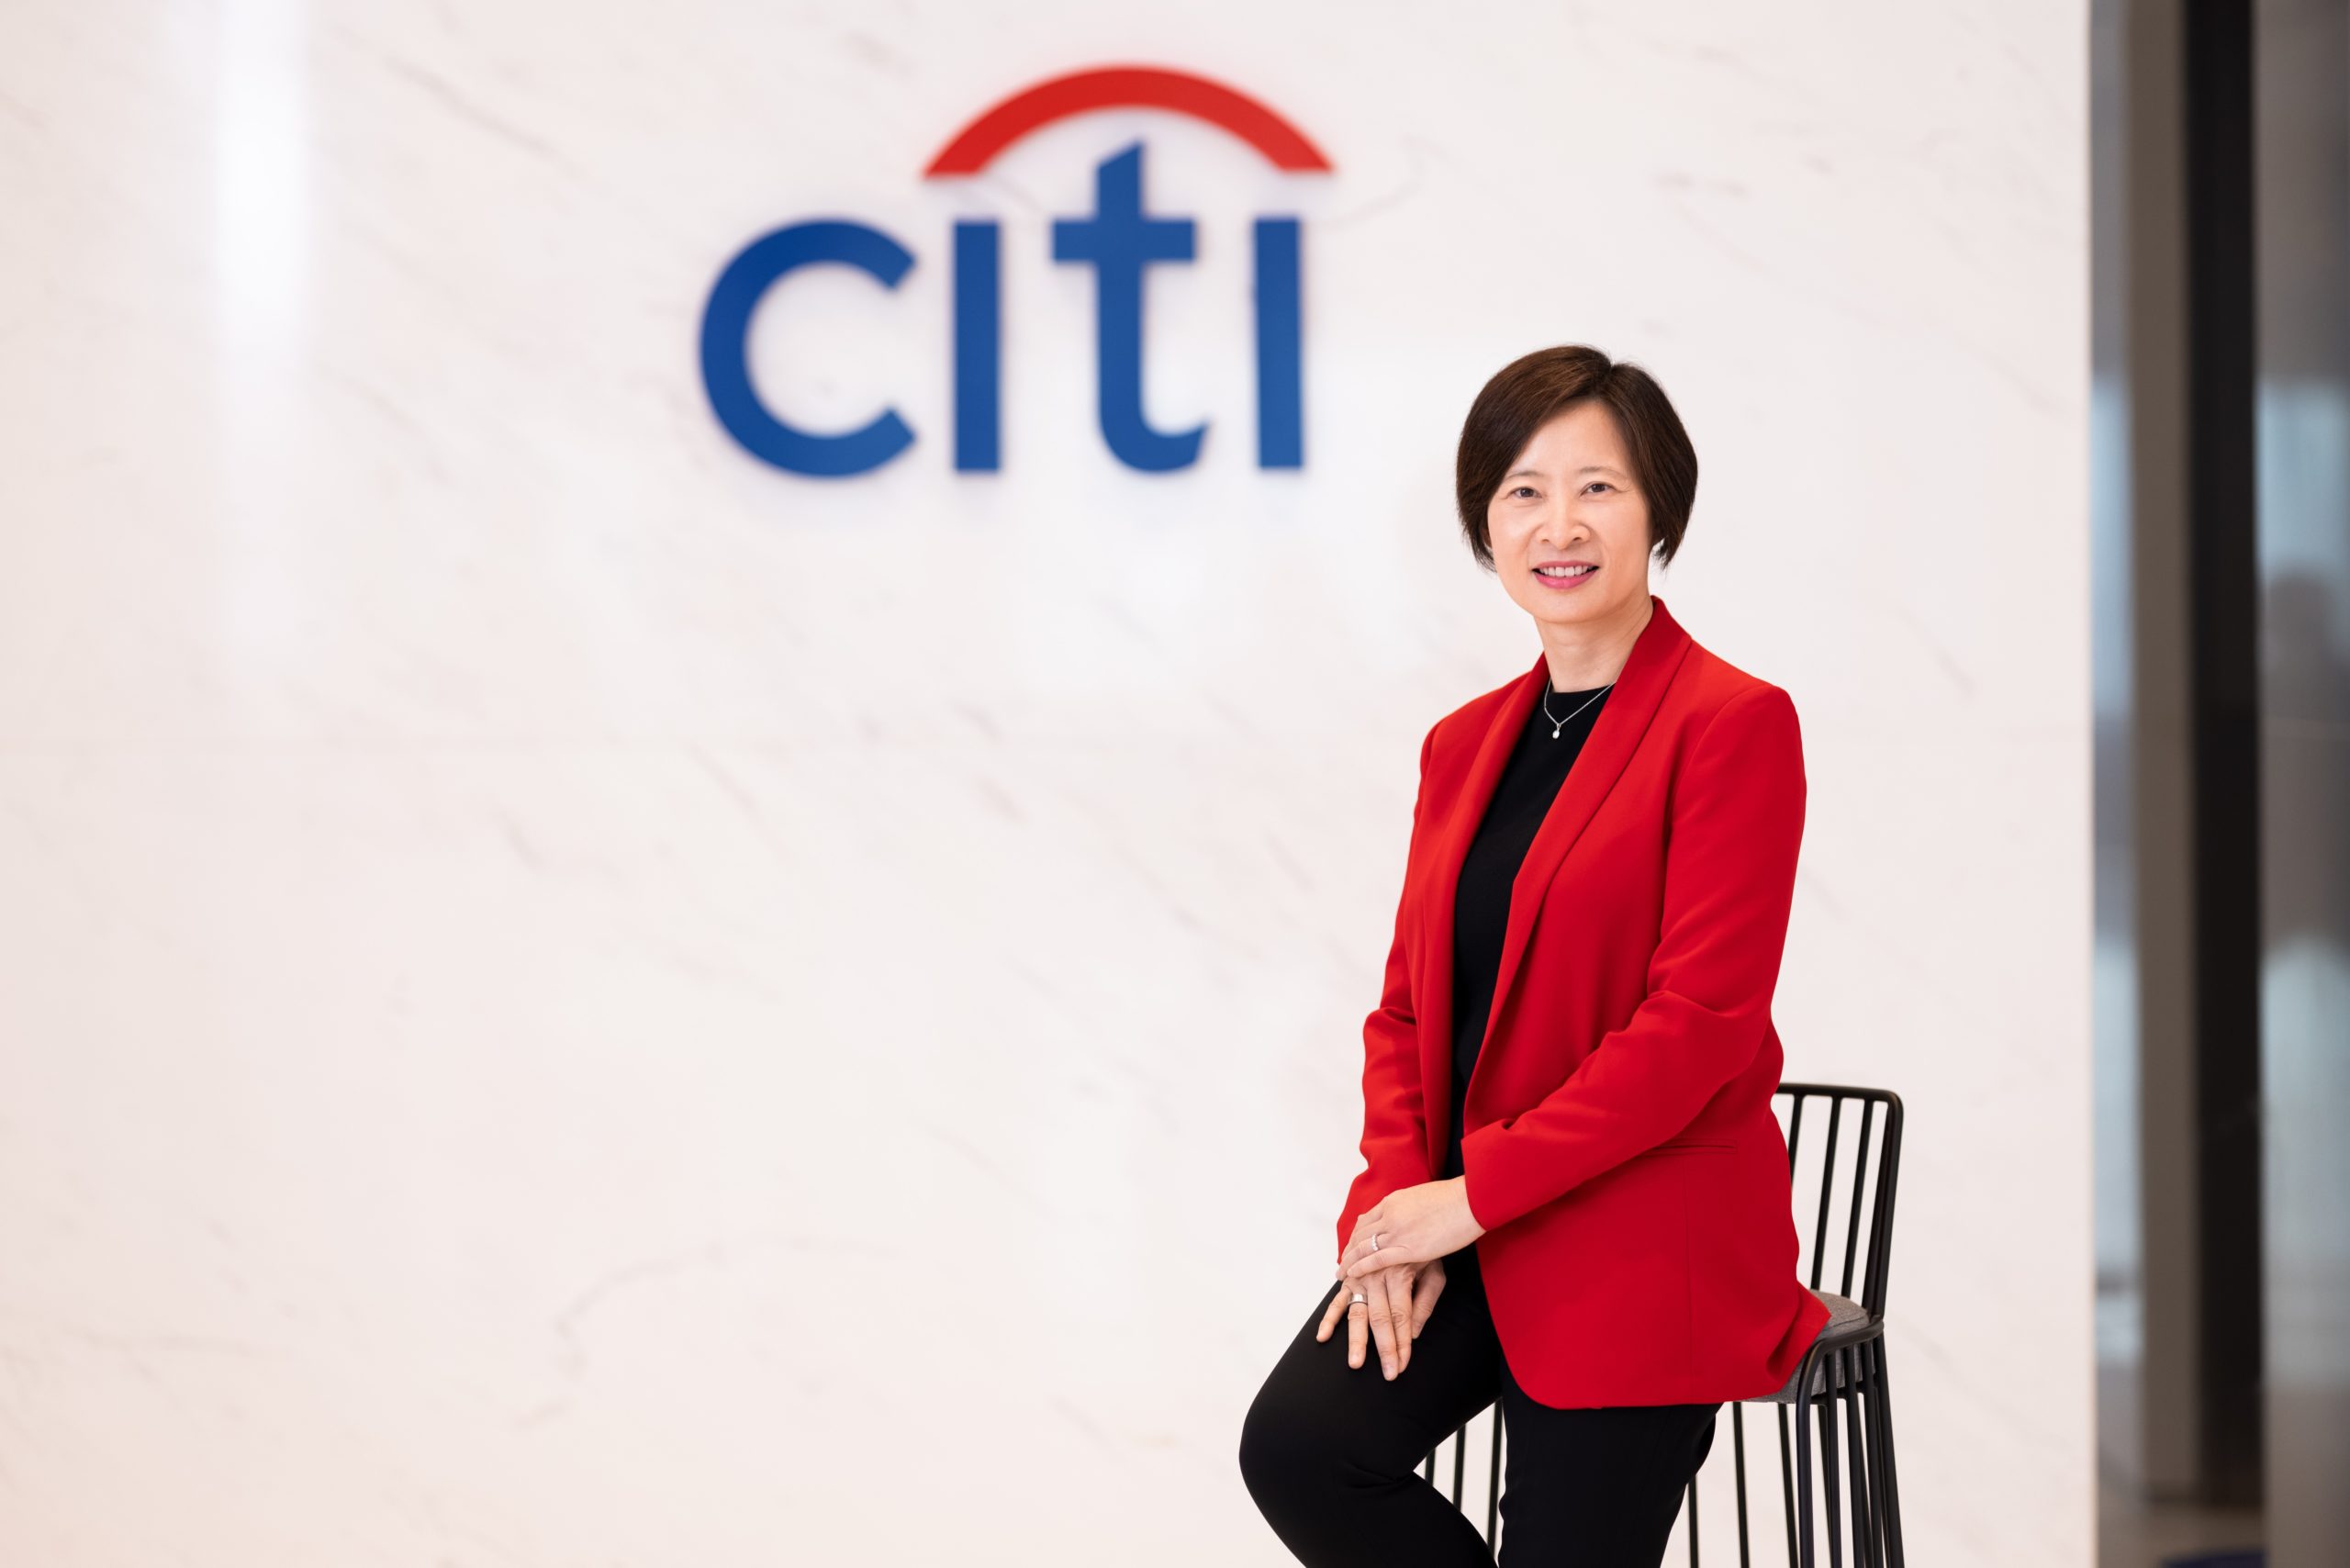 From her first credit card to her present work as CEO, Angel has developed a lifelong relationship with Citi Hong Kong and Macau.